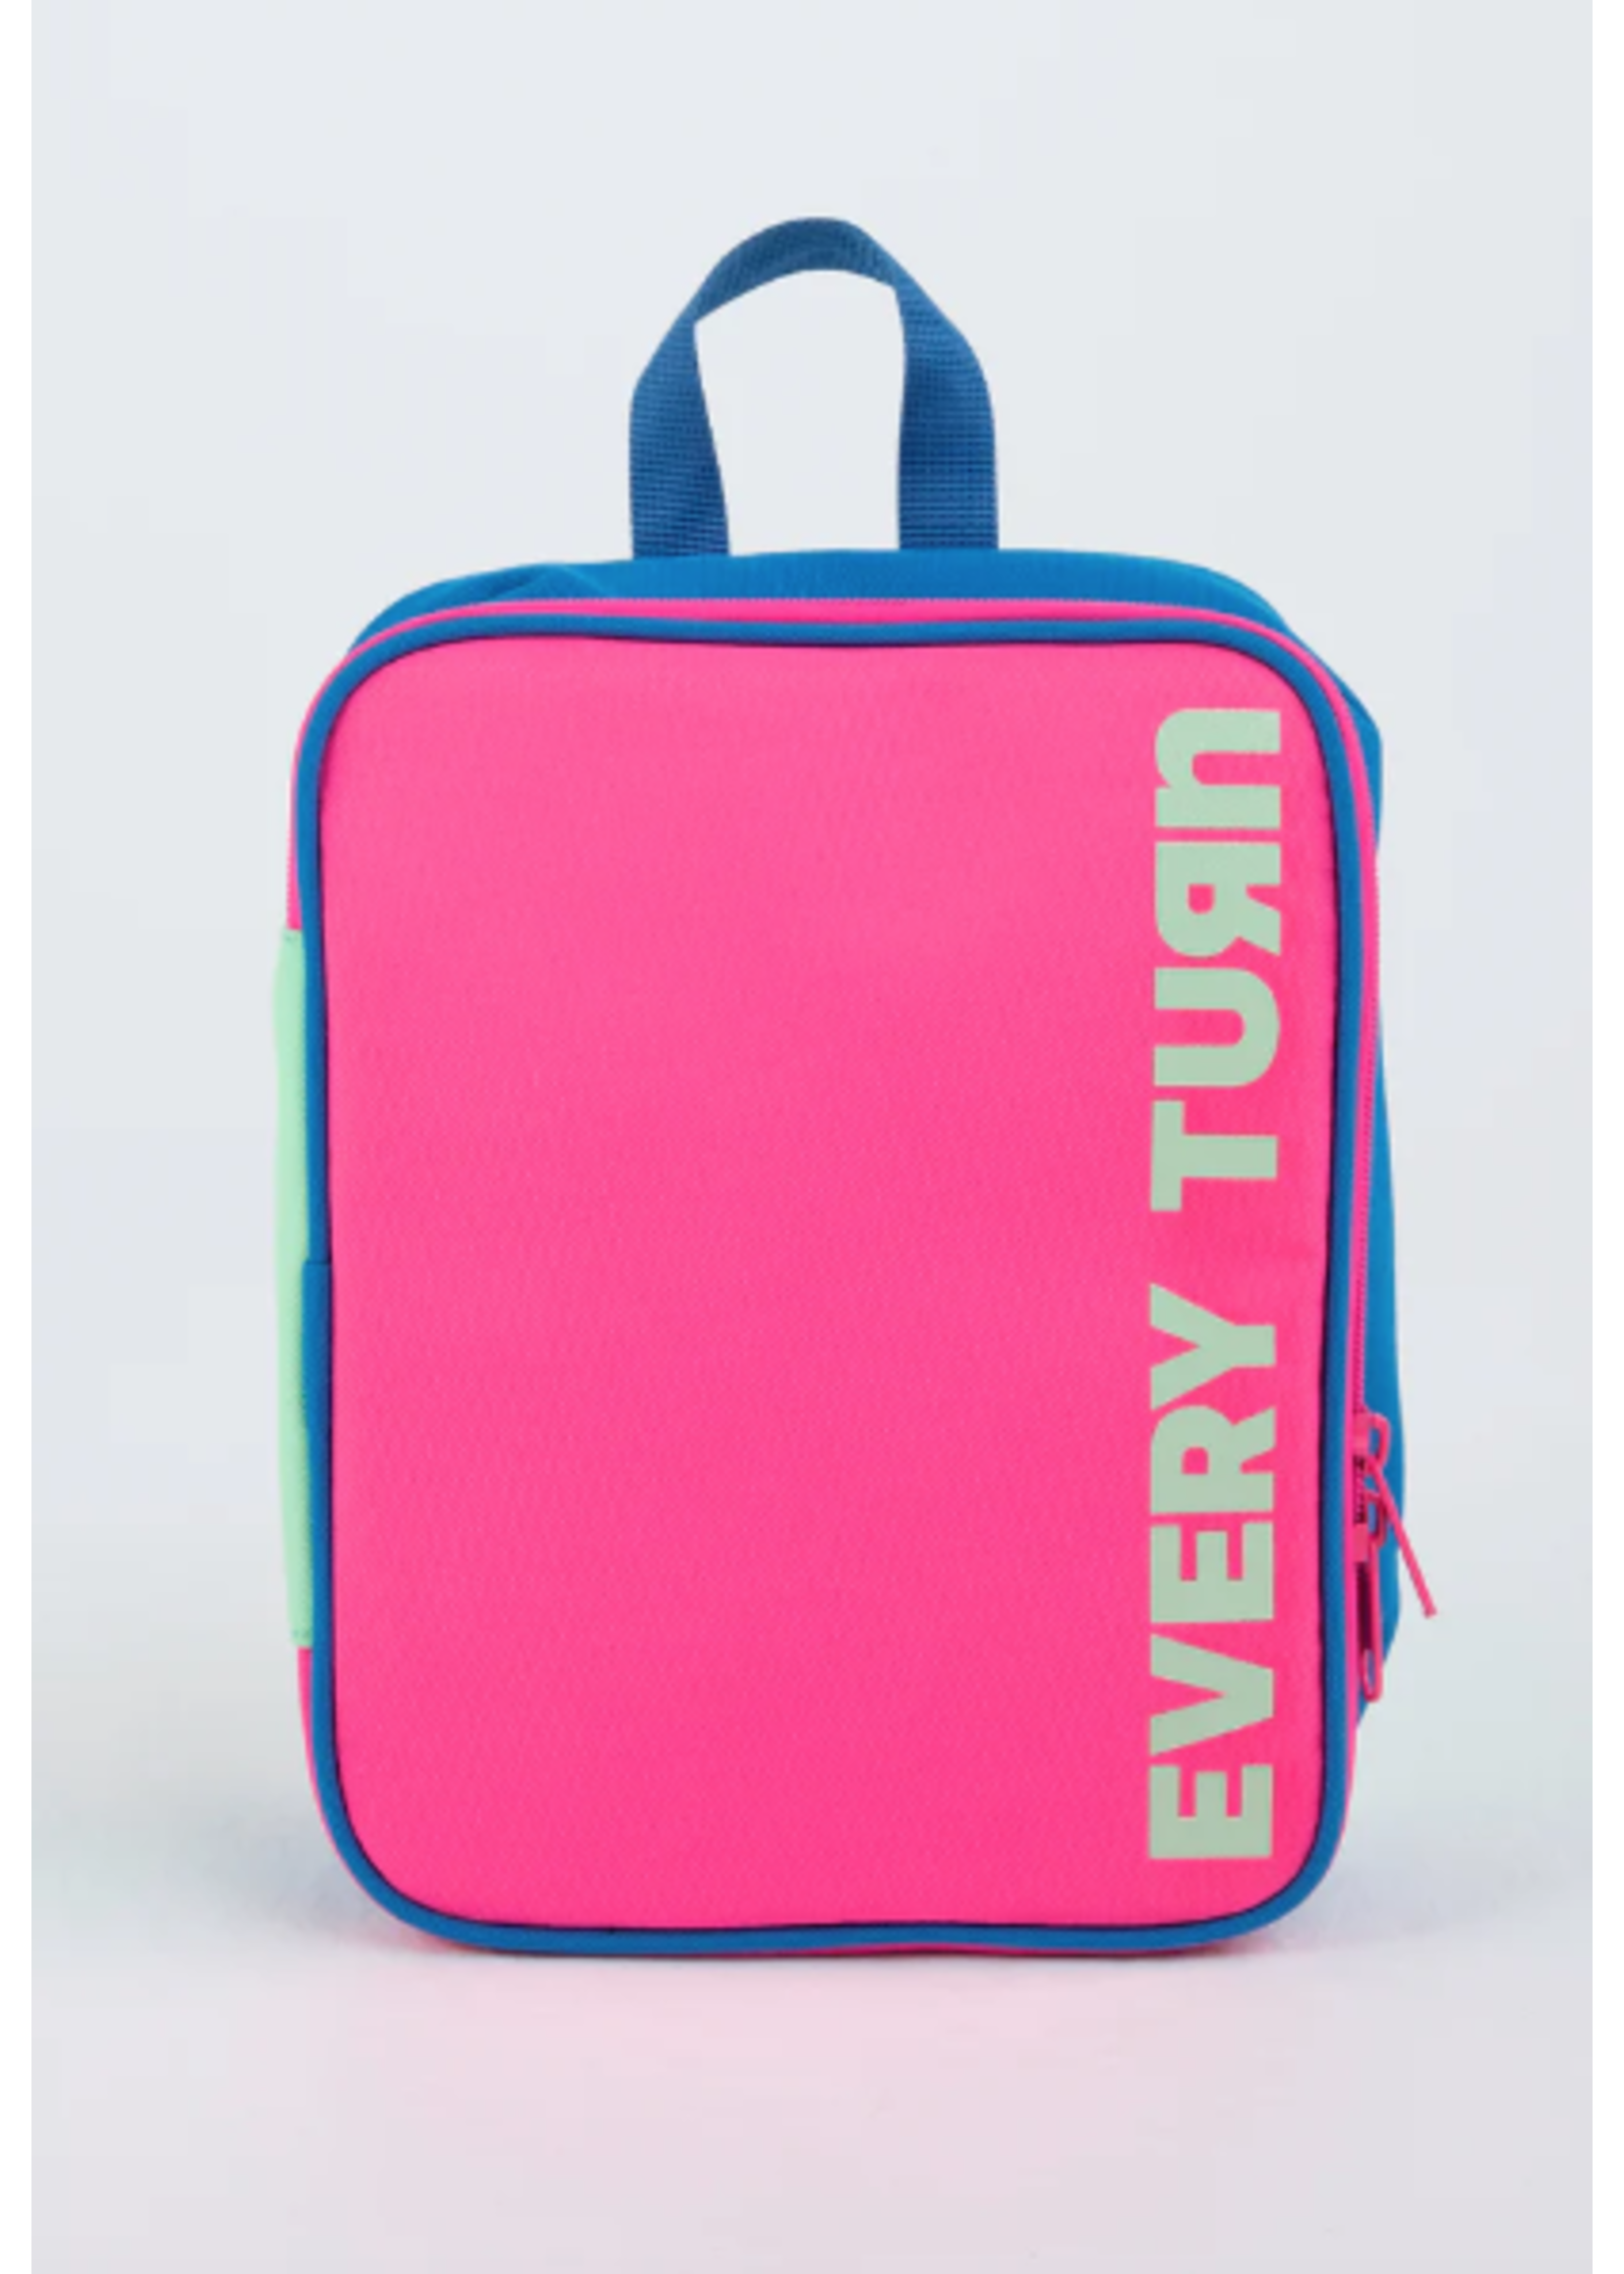 EVERY TURN 2311-AXS050 COLOR POP NEON COLORBLOCK LUNCH BOX BAG